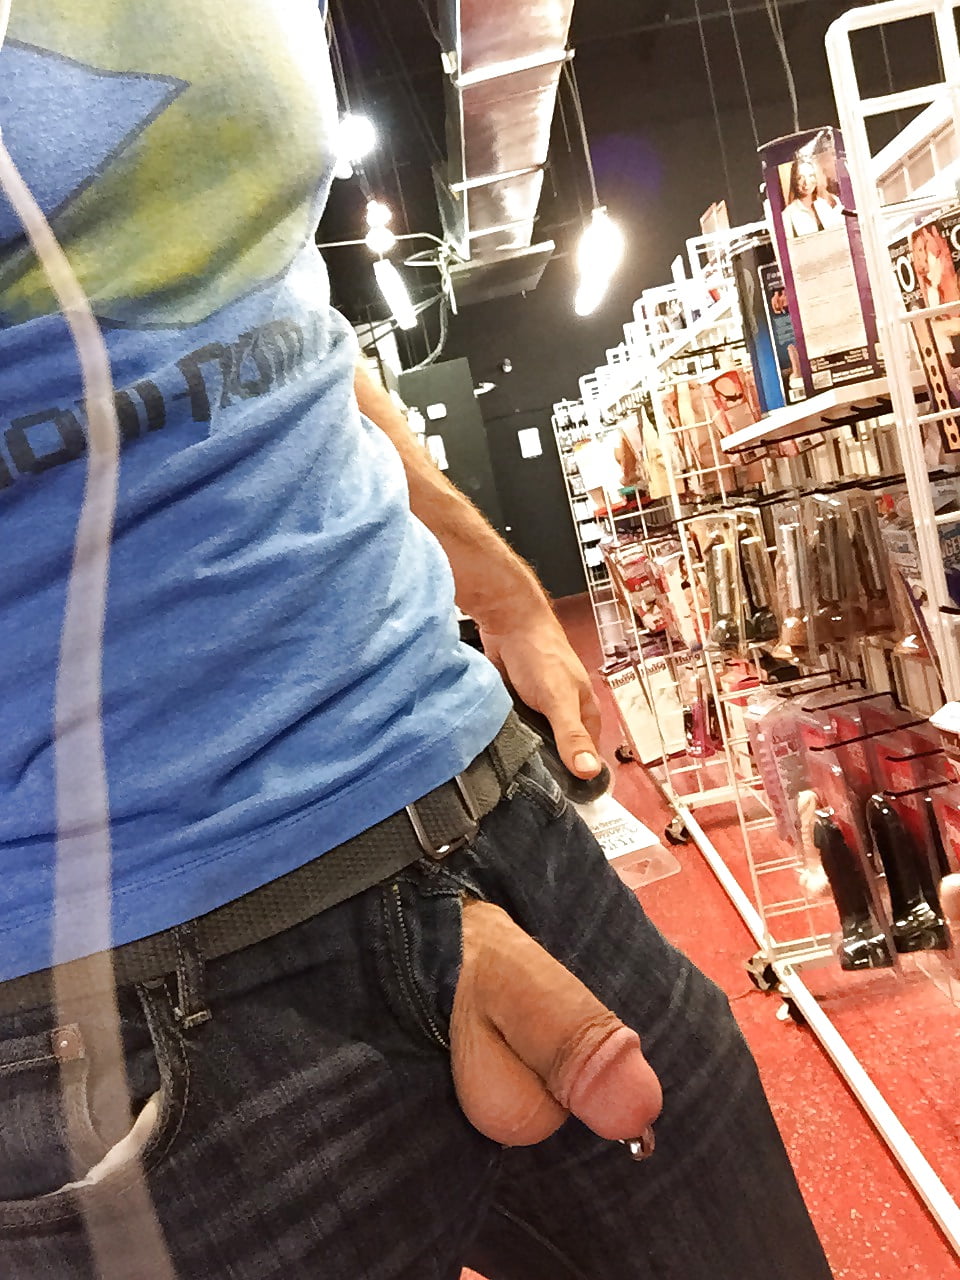 Dick out in store porn